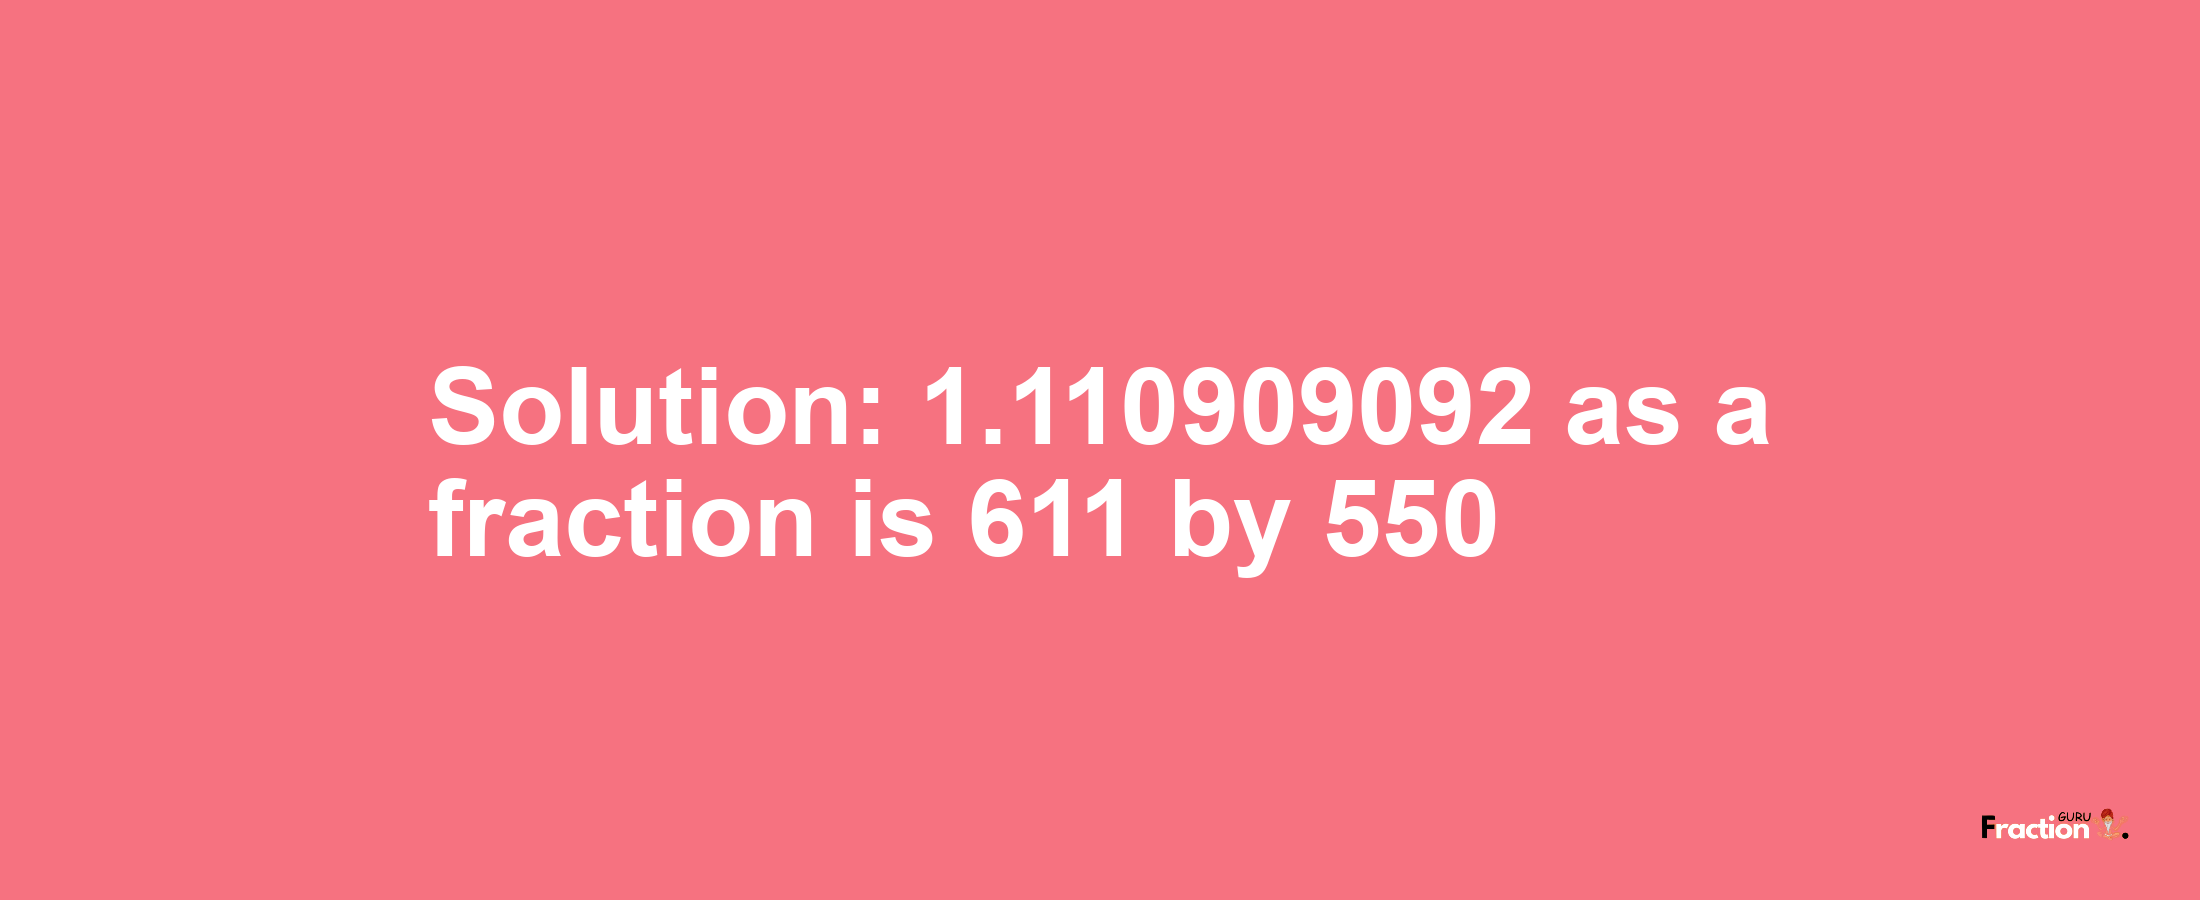 Solution:1.110909092 as a fraction is 611/550